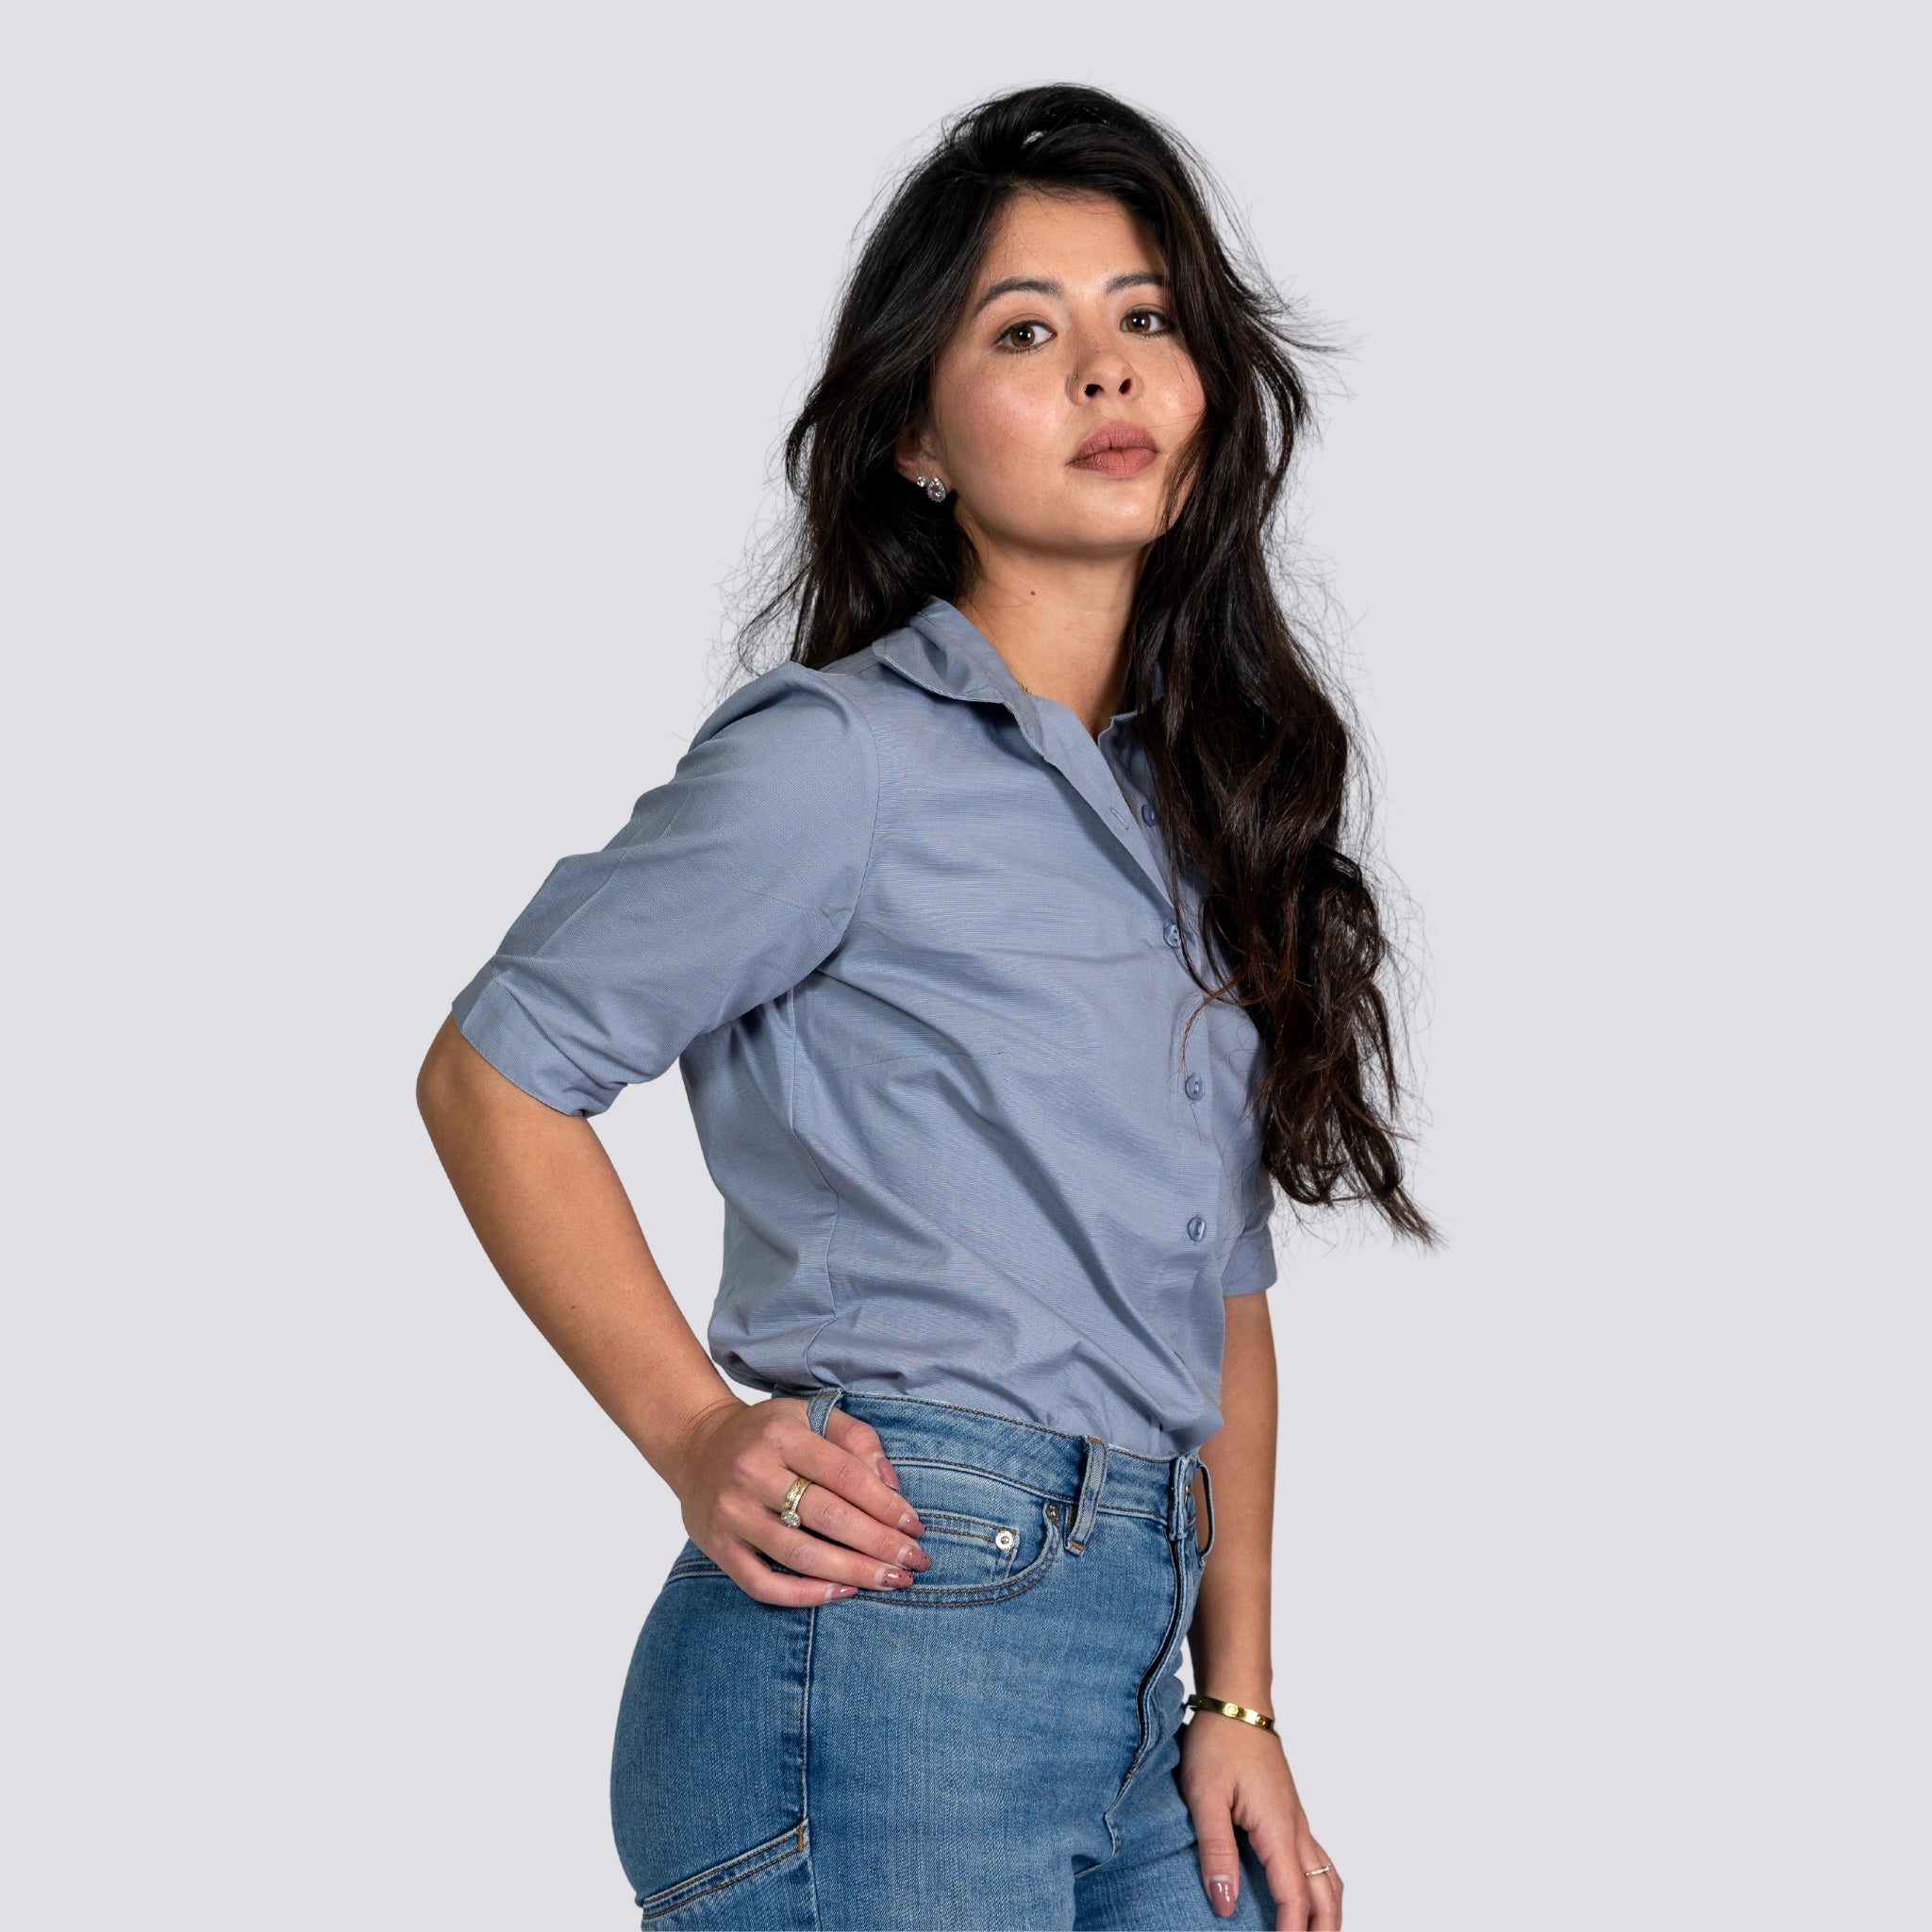 A woman with long dark hair wearing a Karee Grey Mist Linen Shirt For Women and blue jeans, posing with one hand on her hip against a light gray background.